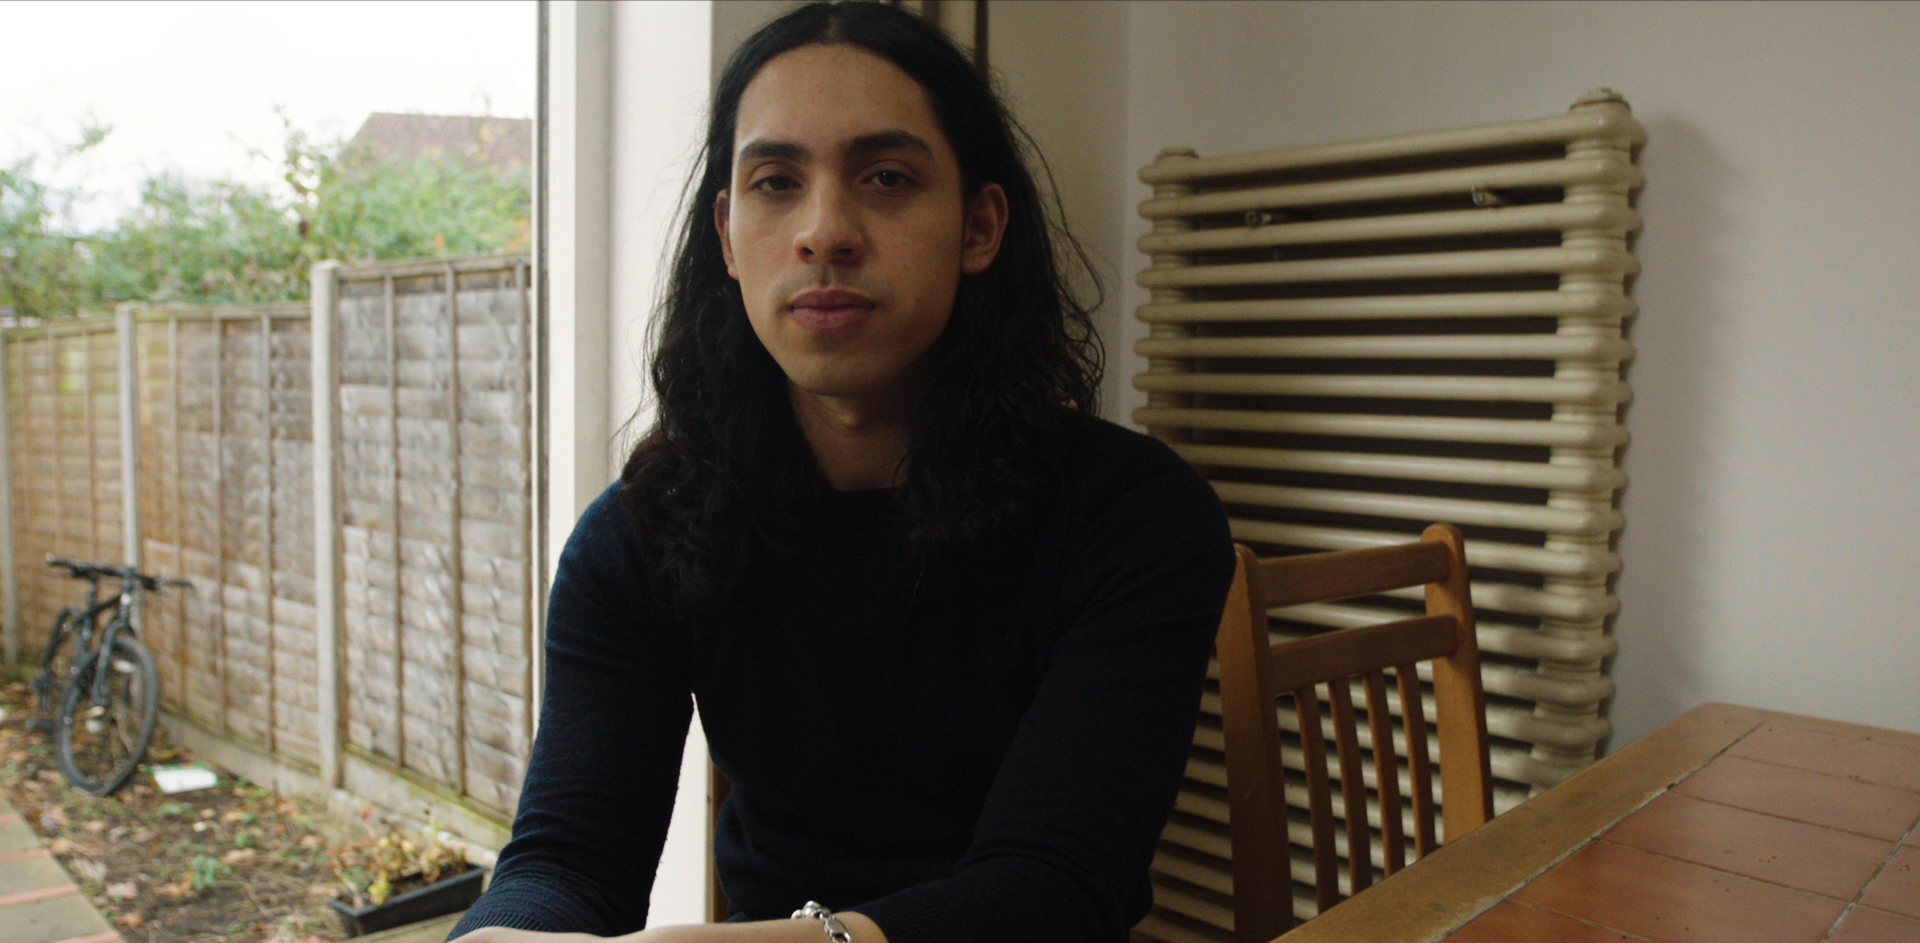 Director – Patrick Taylor Debuts New Short Film “Faces” To Give A Voice To Mixed-Race People.